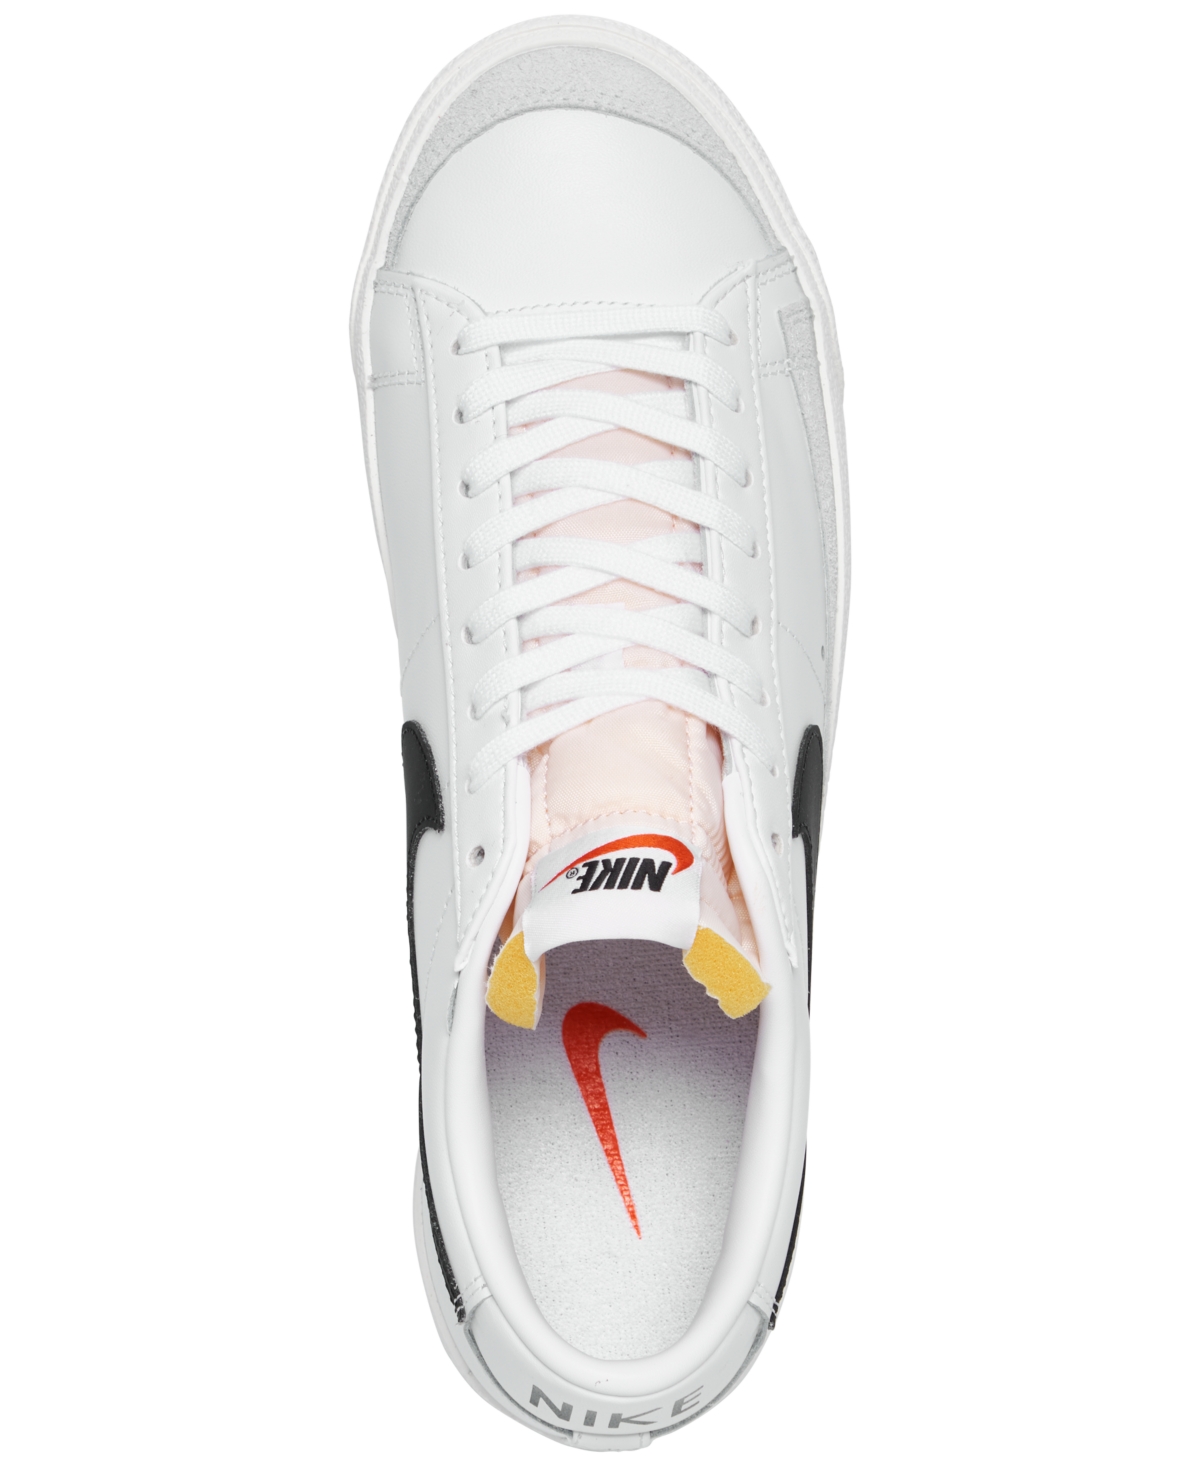 Shop Nike Men's Blazer Low 77 Vintage-like Casual Sneakers From Finish Line In White,sail,black